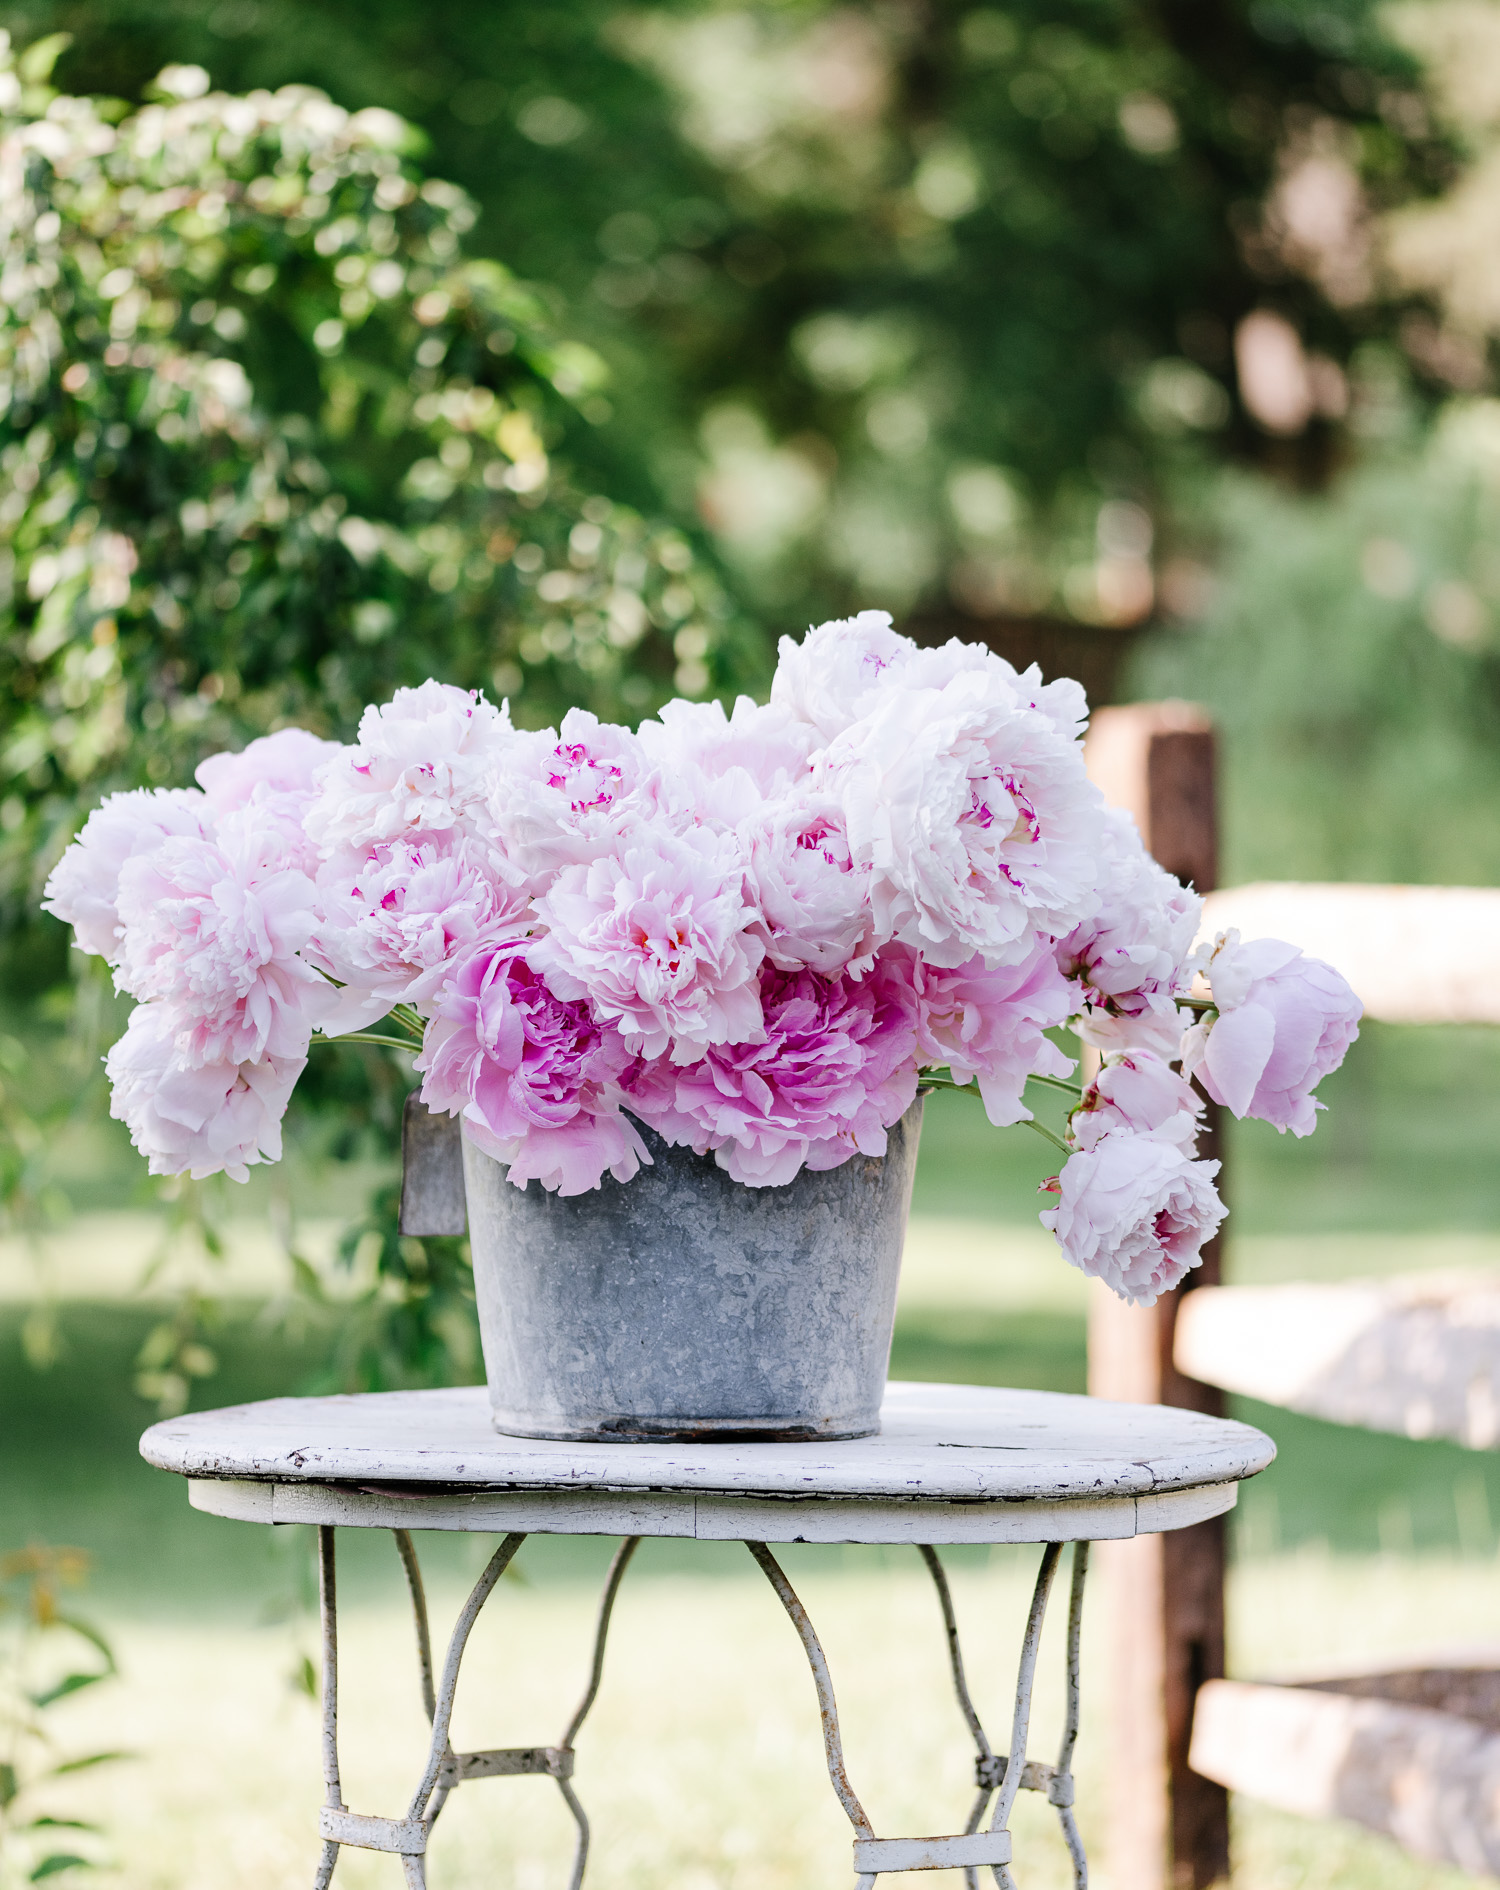 Pink Peonies in a vintage bucket | Among the Flowers